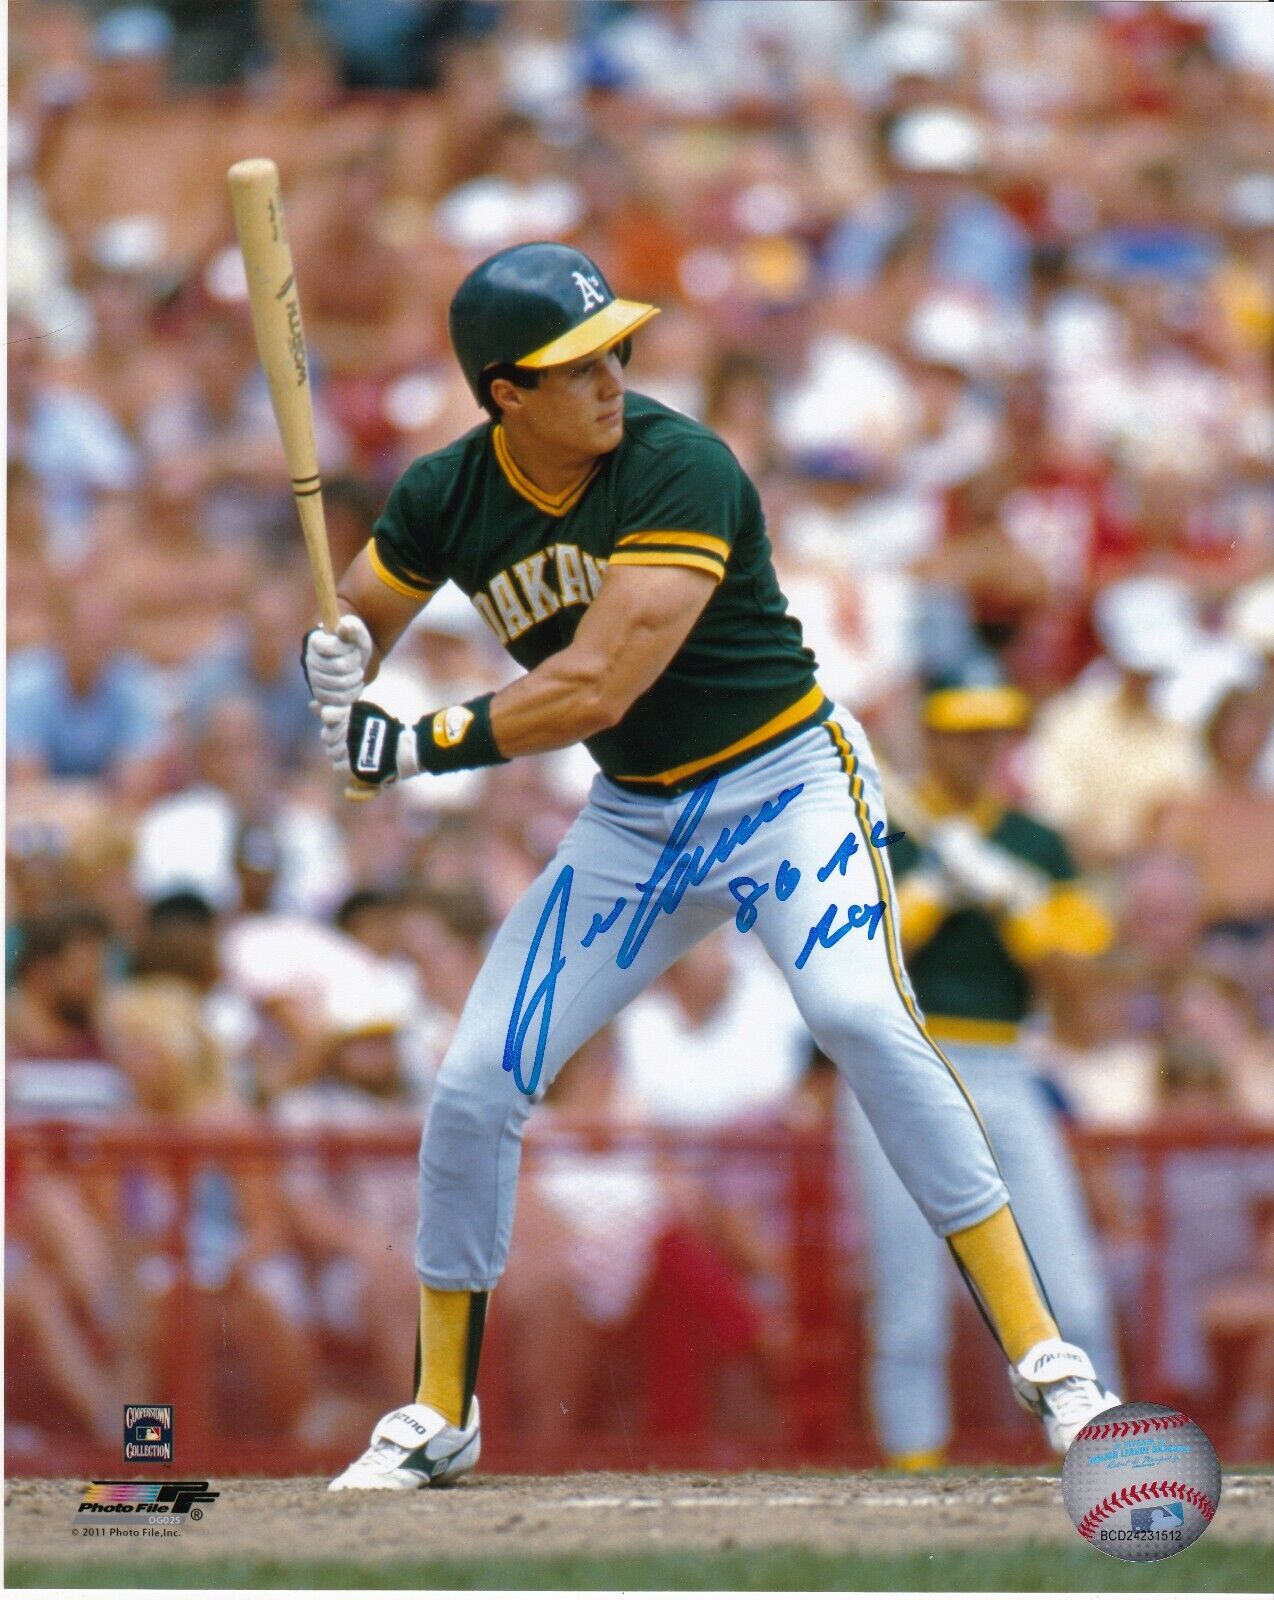 JOSE CANSECO OAKLAND A'S 1986 AL ROY ACTION SIGNED 8x10